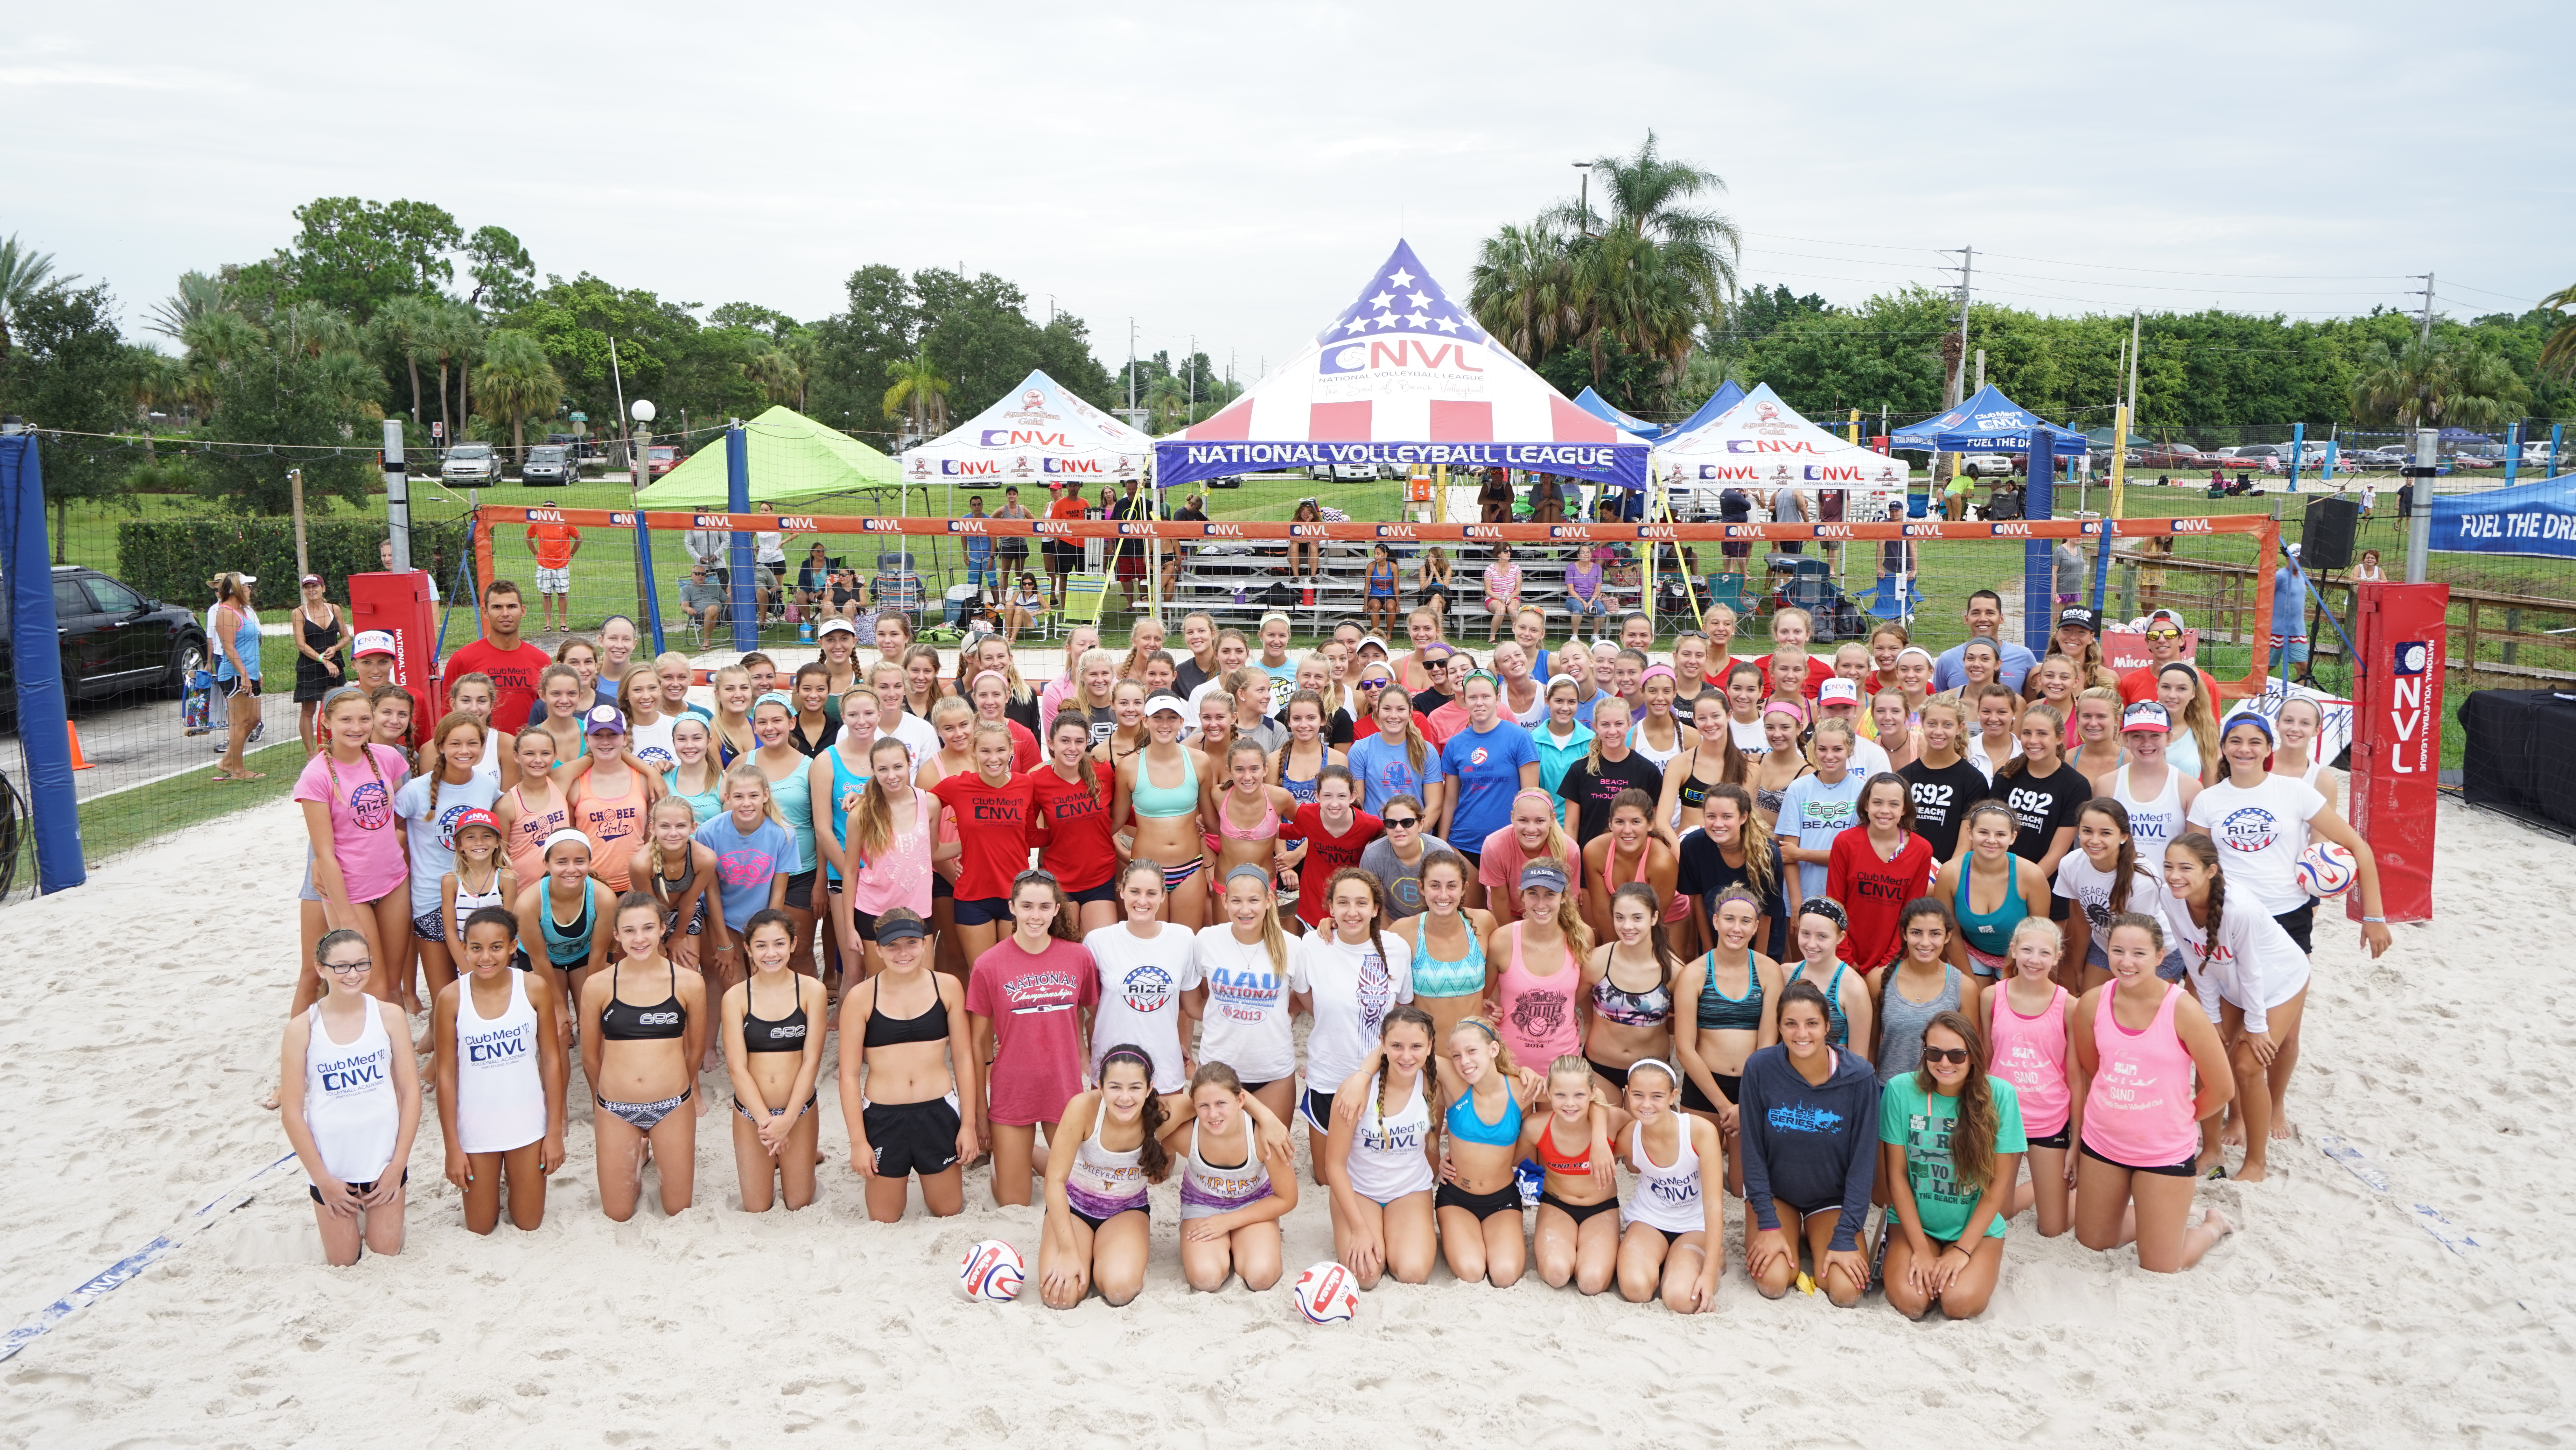 The Club Med NVL Academy Spikes Promising Future For Rising Beach Volleyball Stars